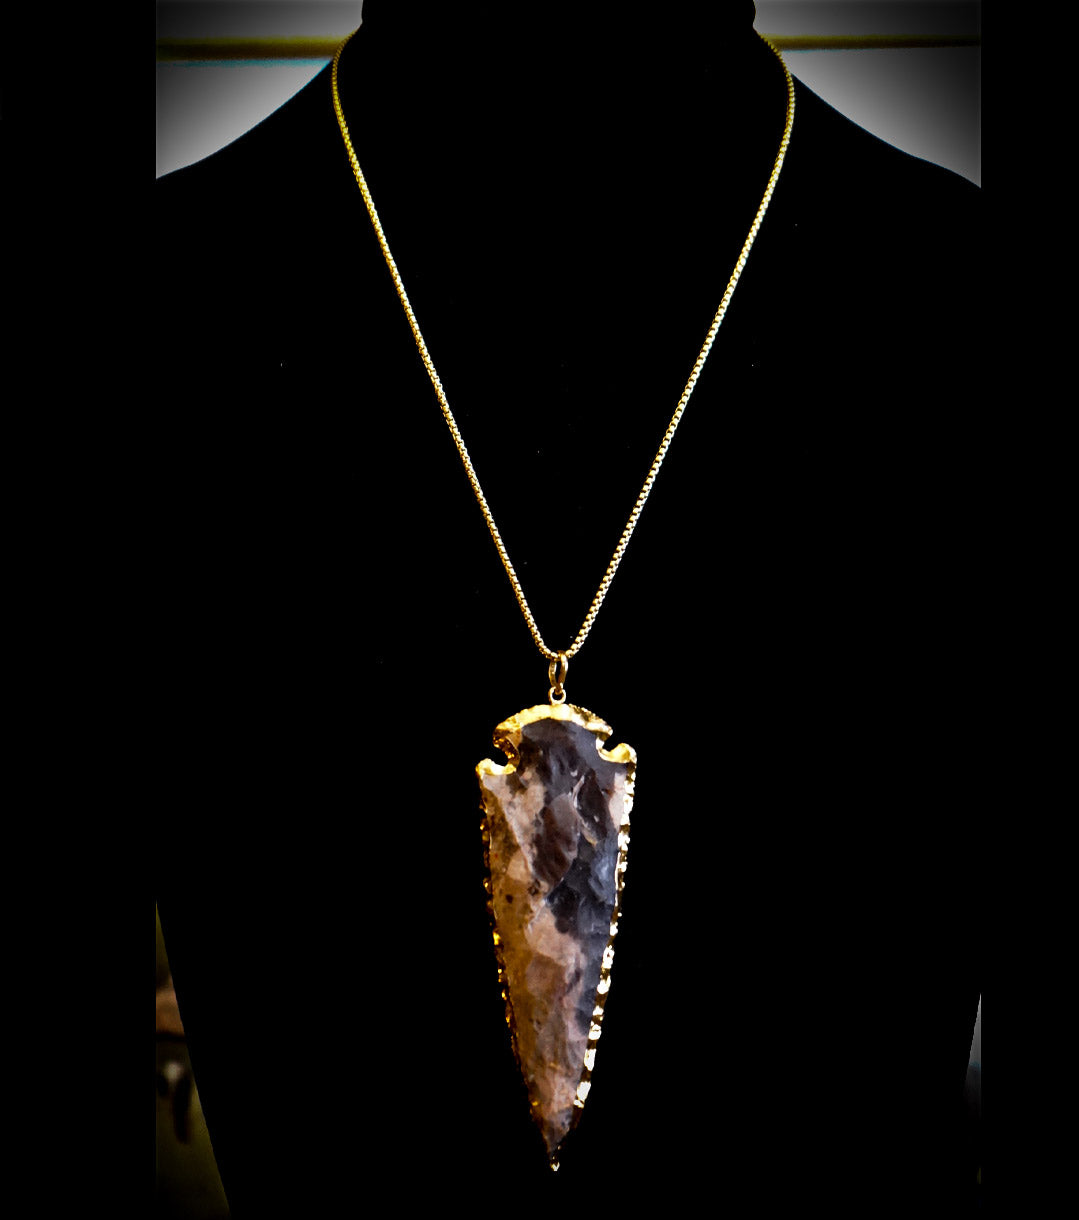 Agate Spearhead with Gold Leaf Pendant Necklace